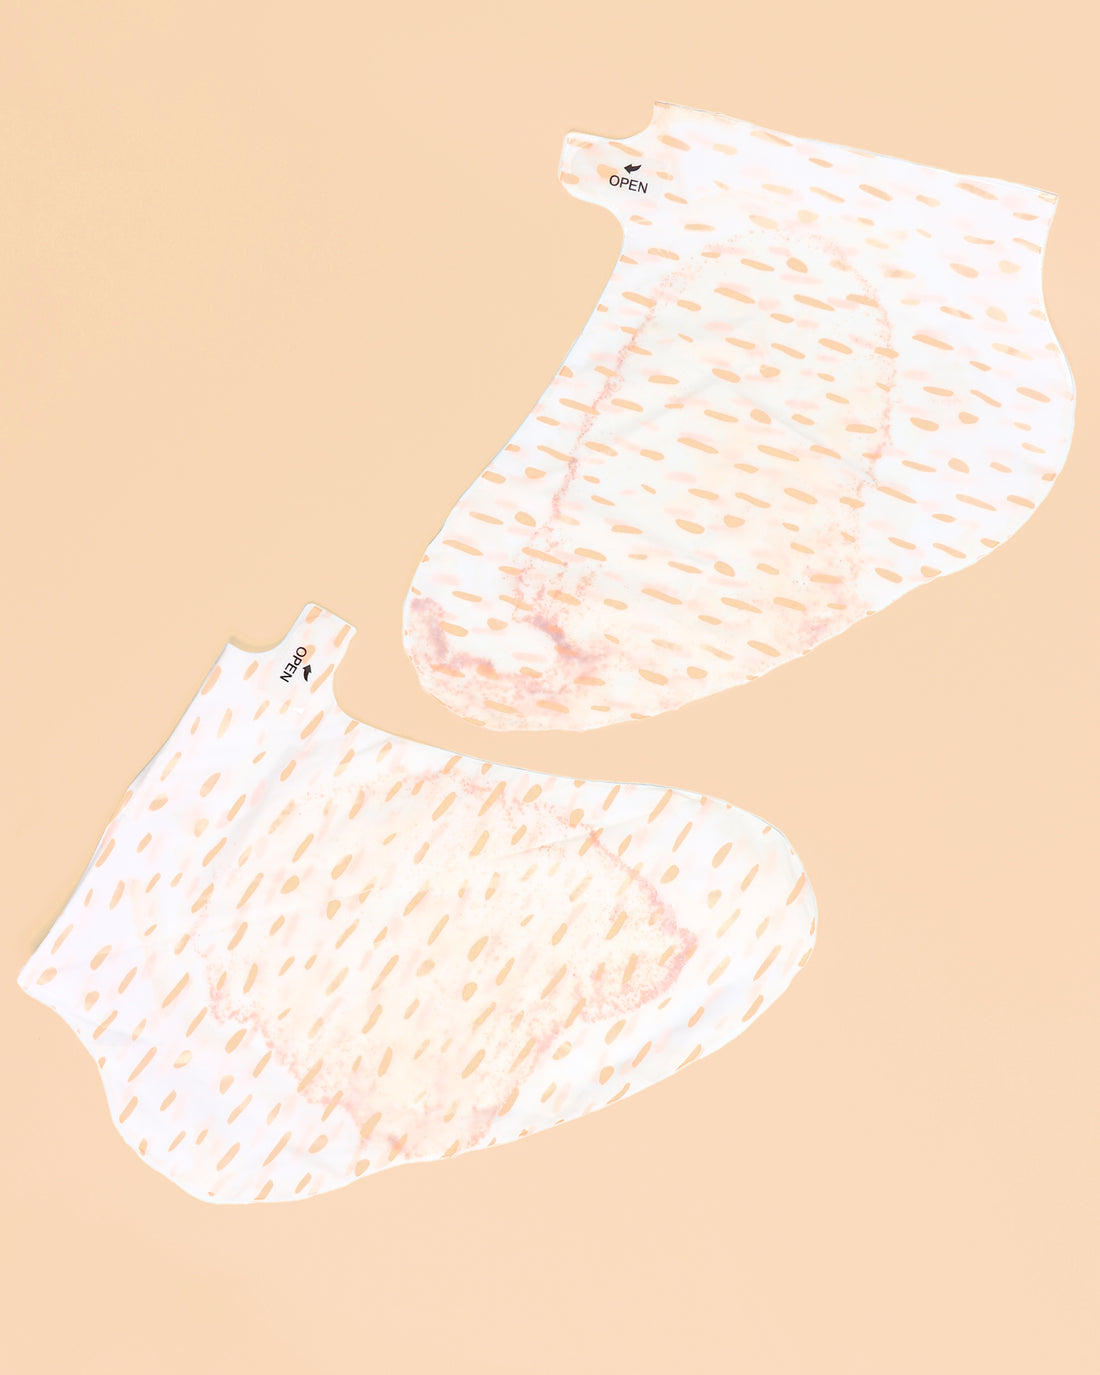 Sole_mates_foot_mask_packet_3-292